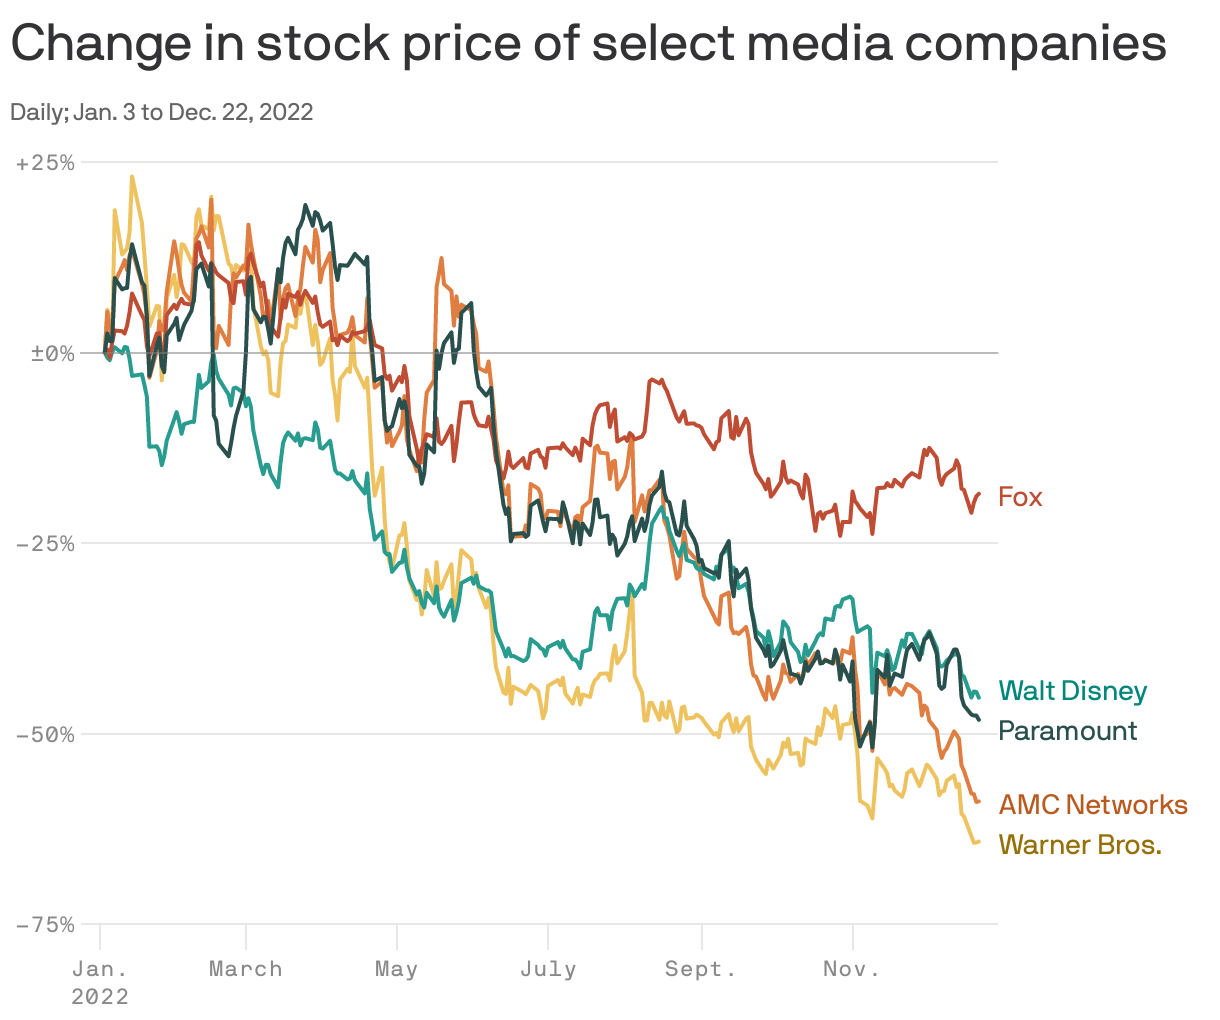 Change in stock price of select media companies
